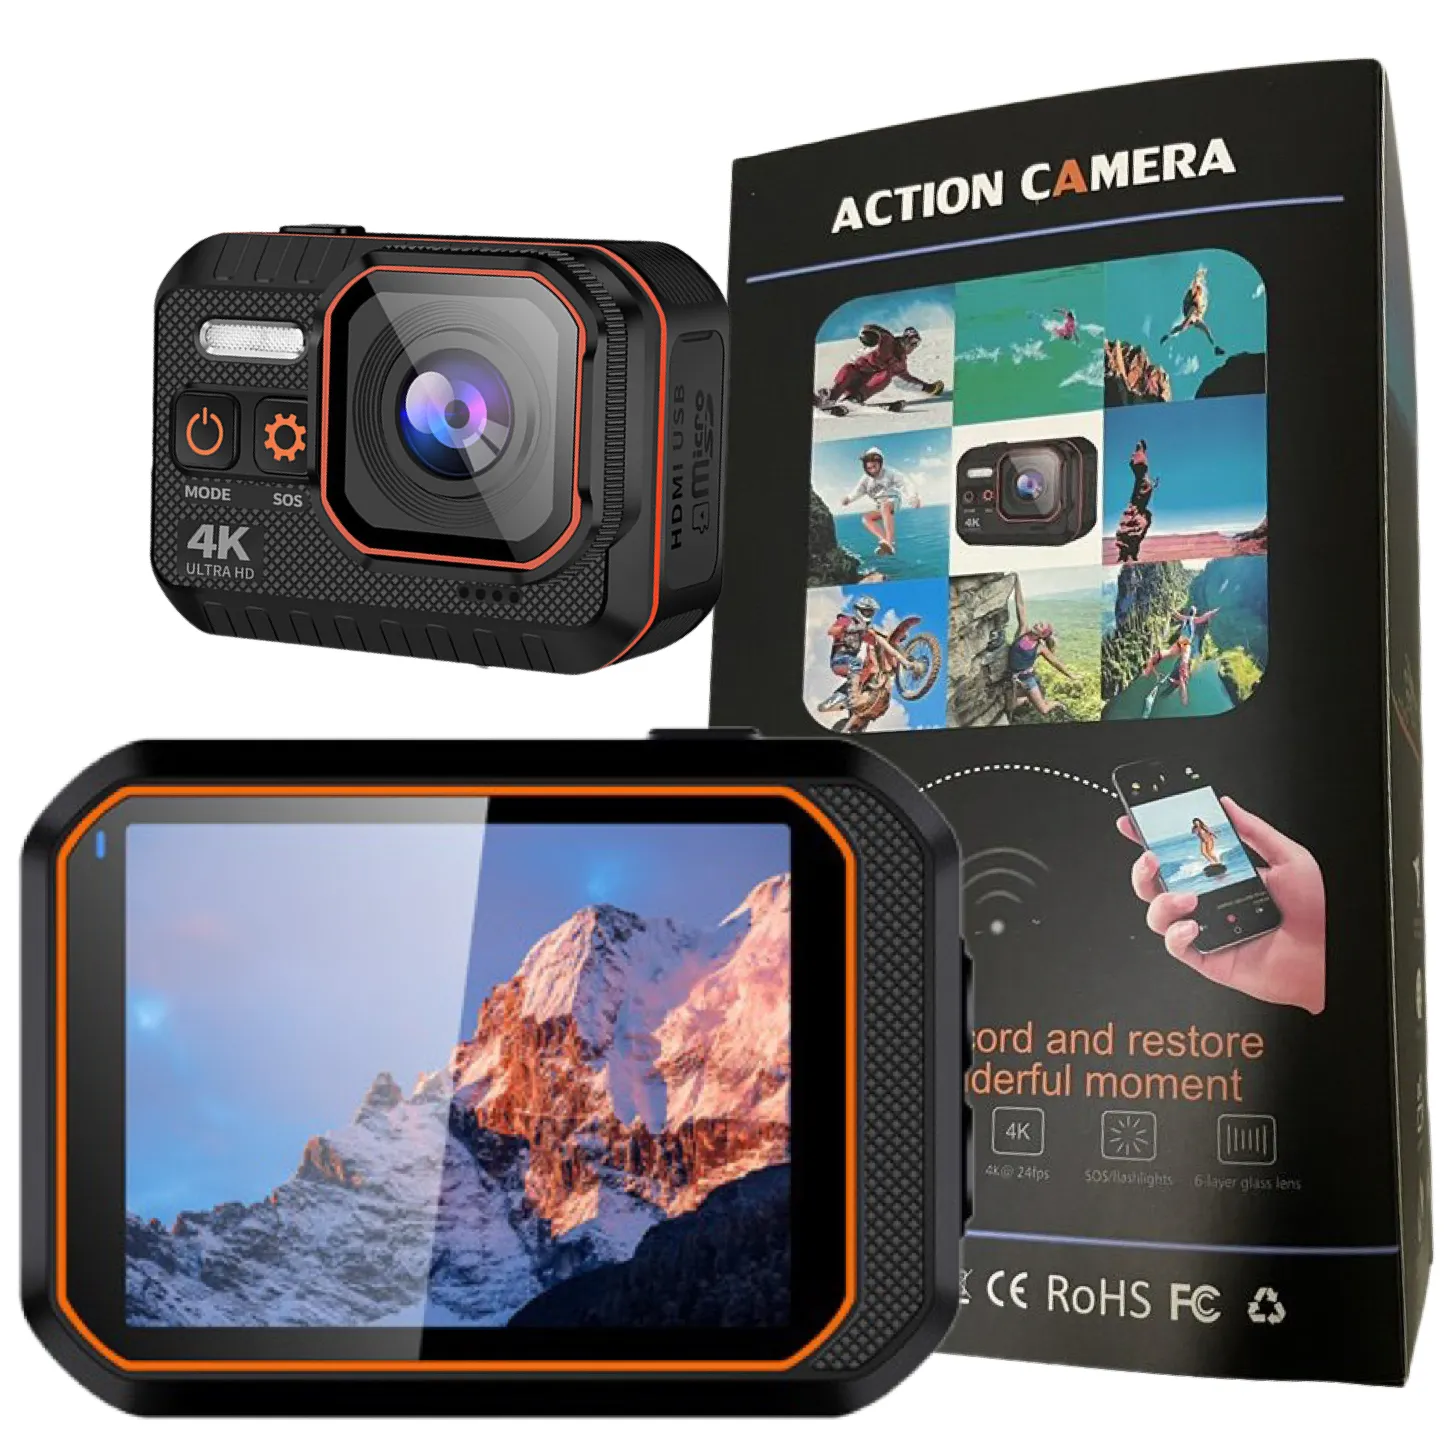 Action Camera Sport Camera 4K 16MP Underwater Camera 6 Anti Shake 170 Degree Wide Angle Waterproof for Outdoor Skiing Climbing